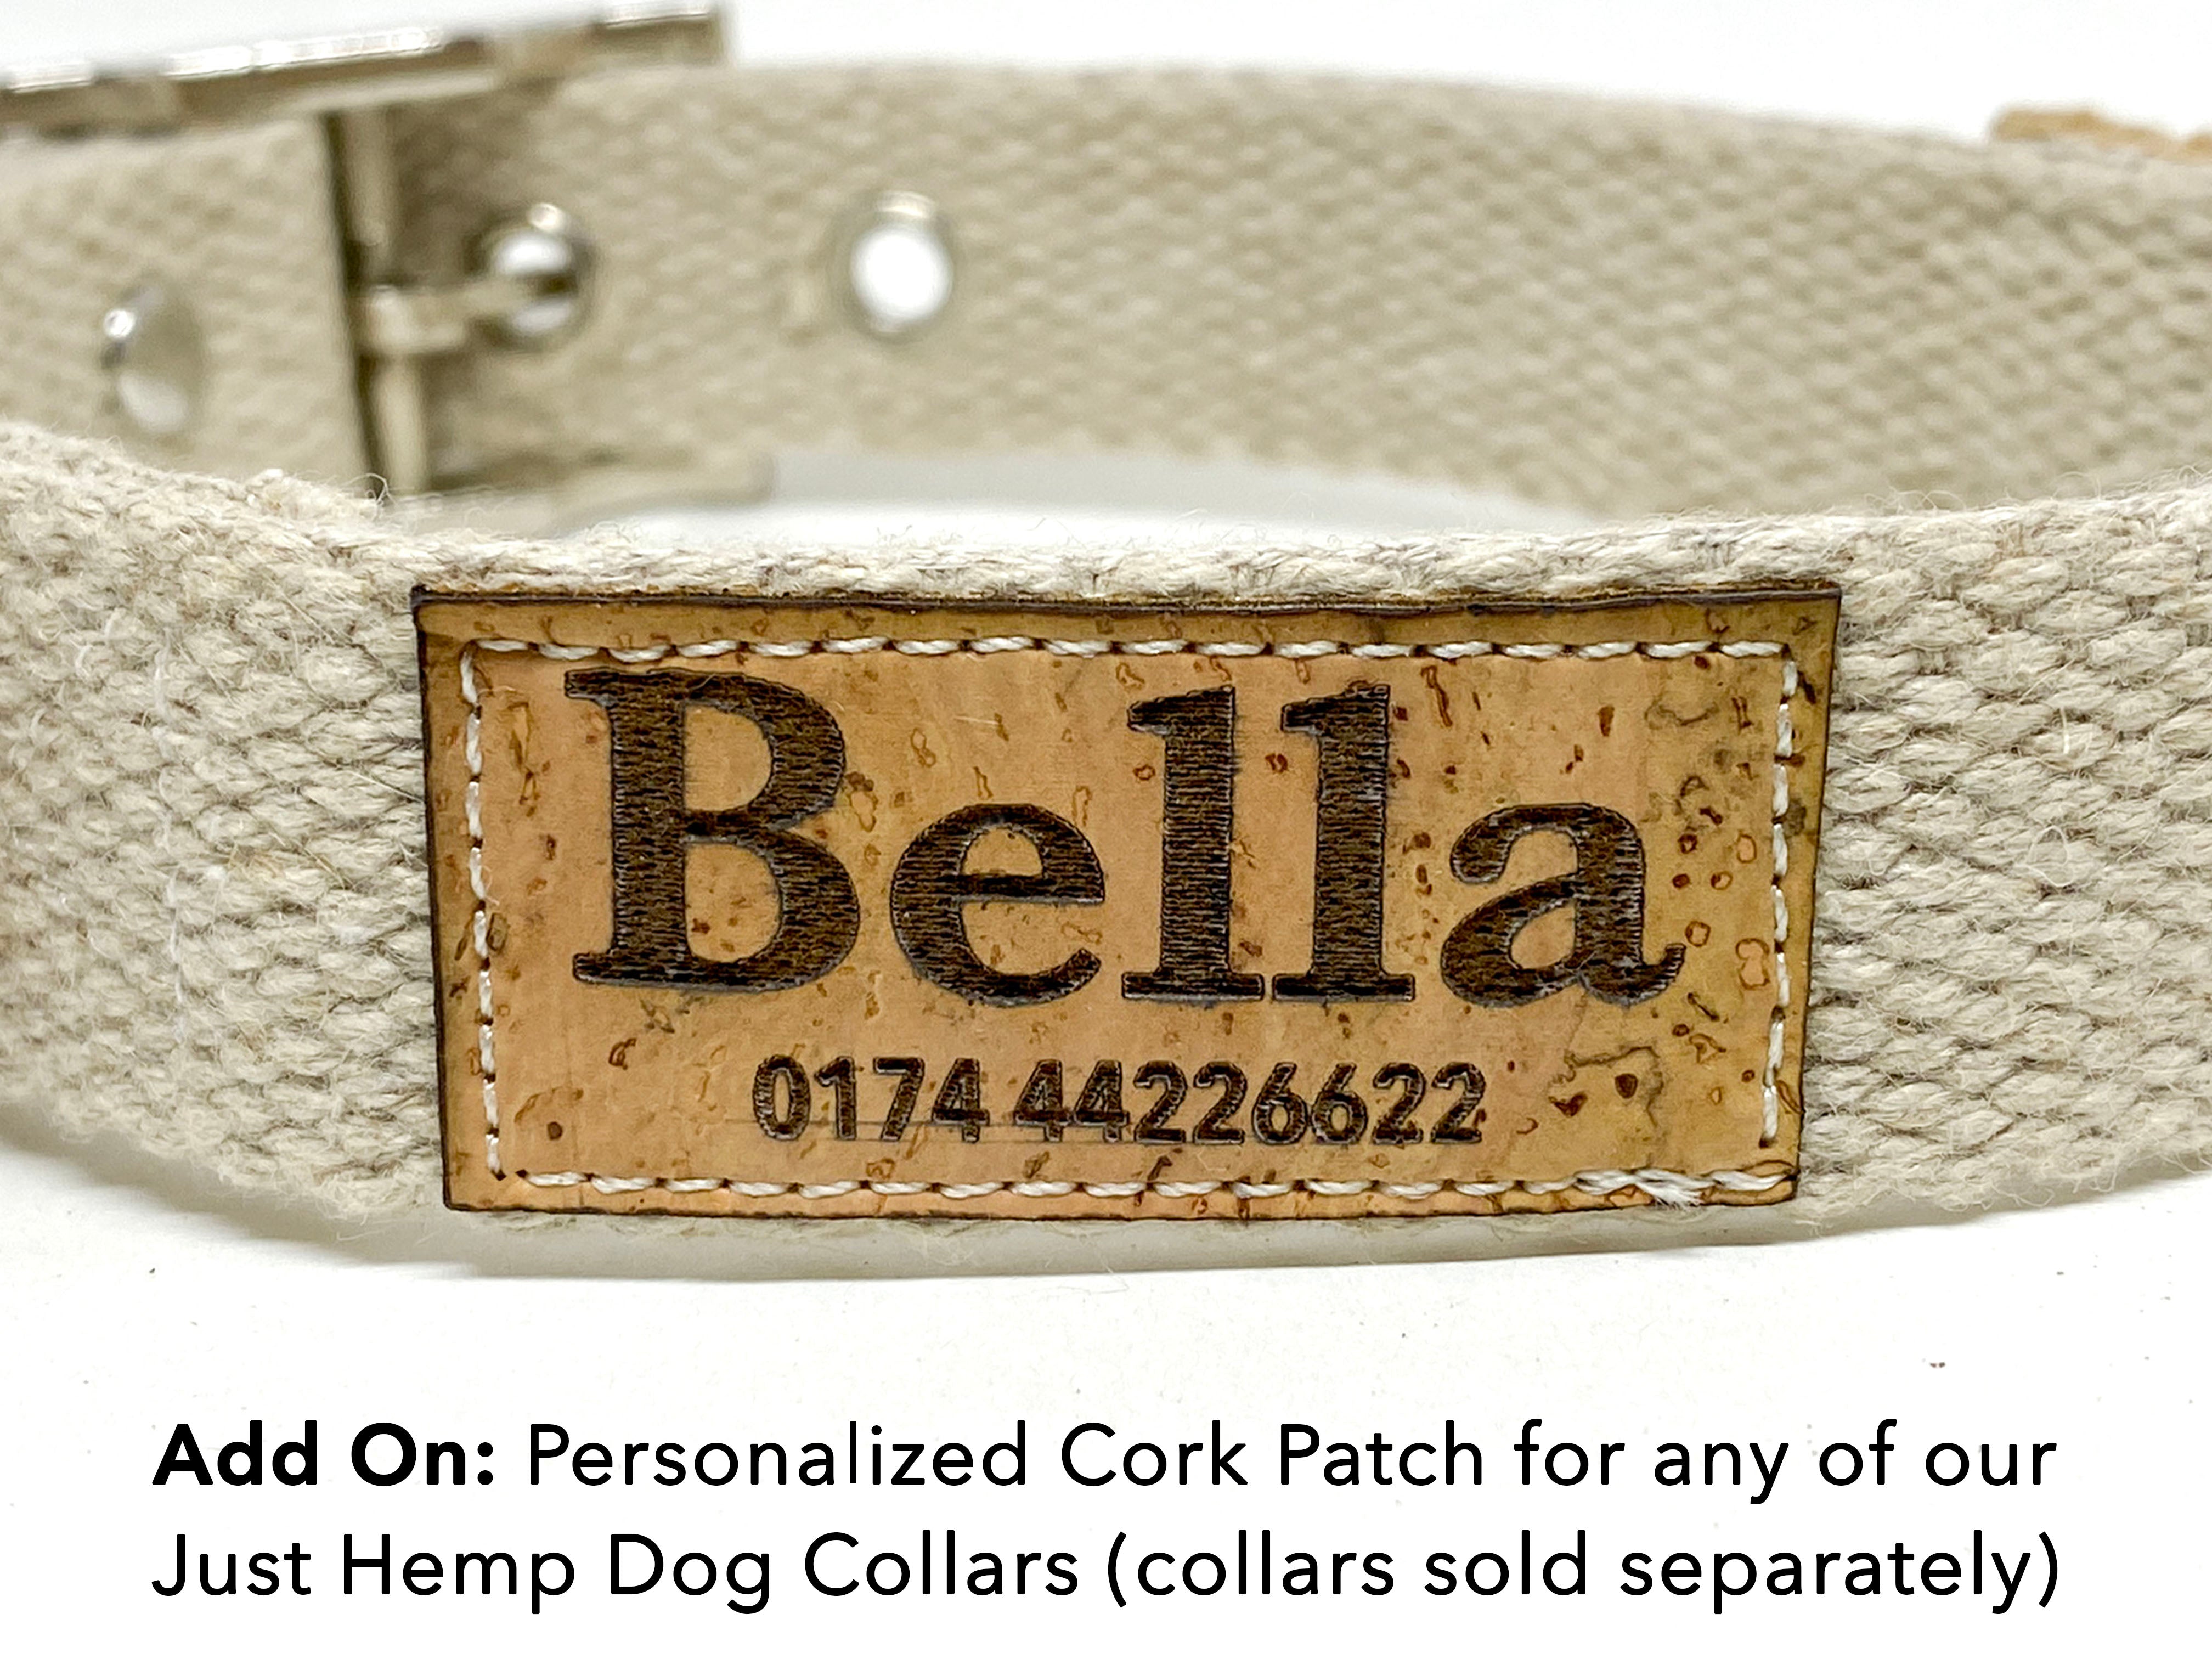 Personalized Cork Patch